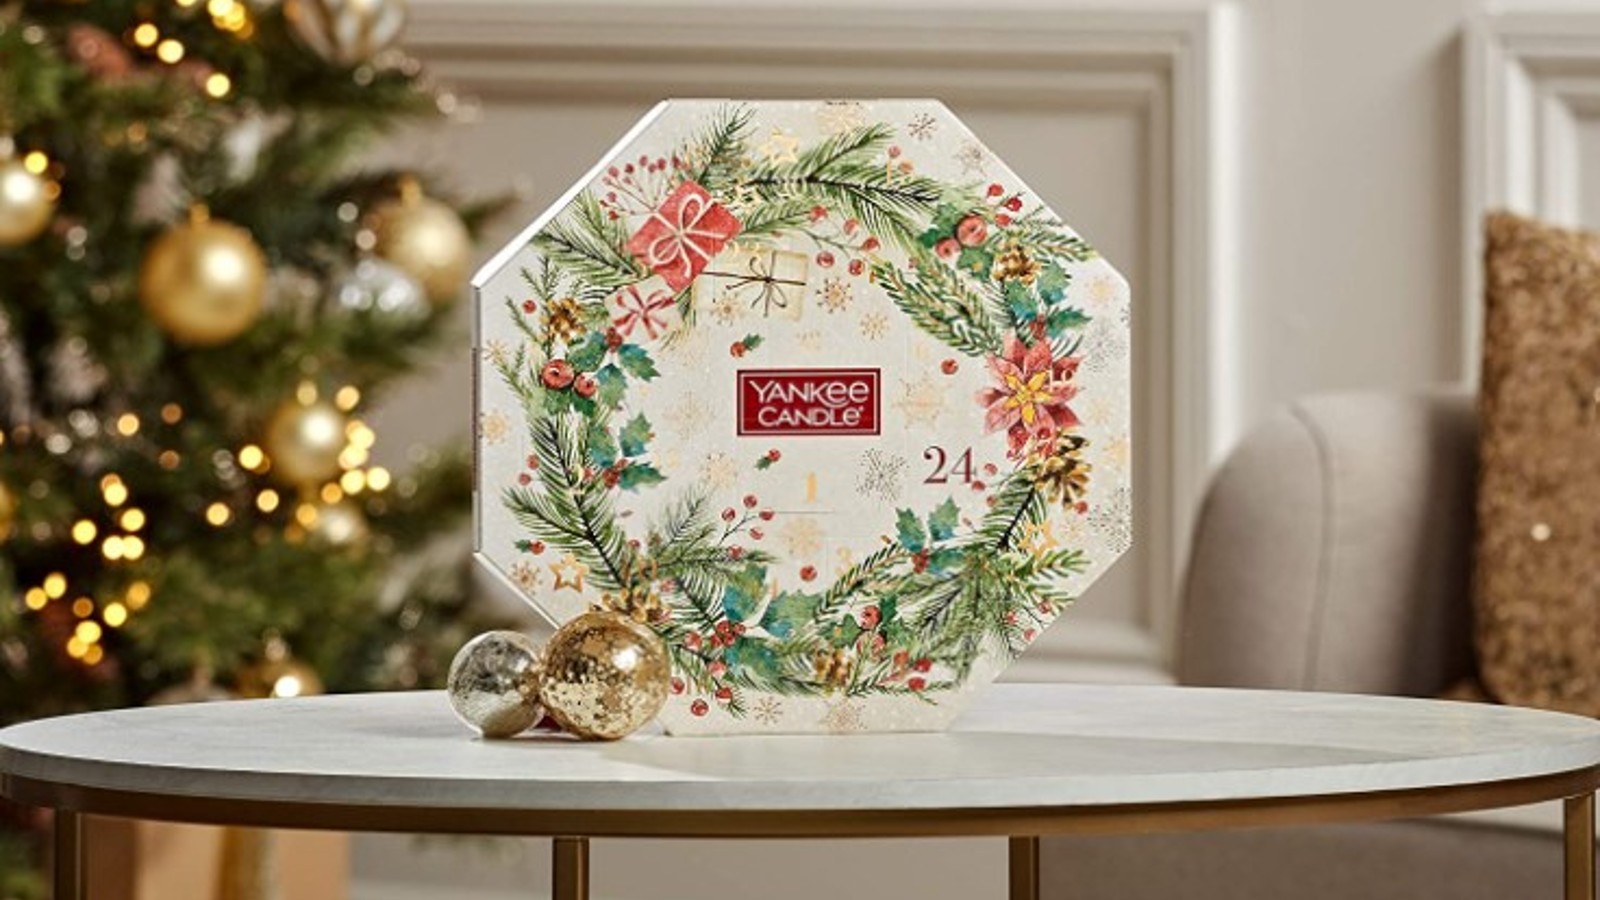 The Yankee Candle Advent Calendar is on sale at Amazon right now GoodTo